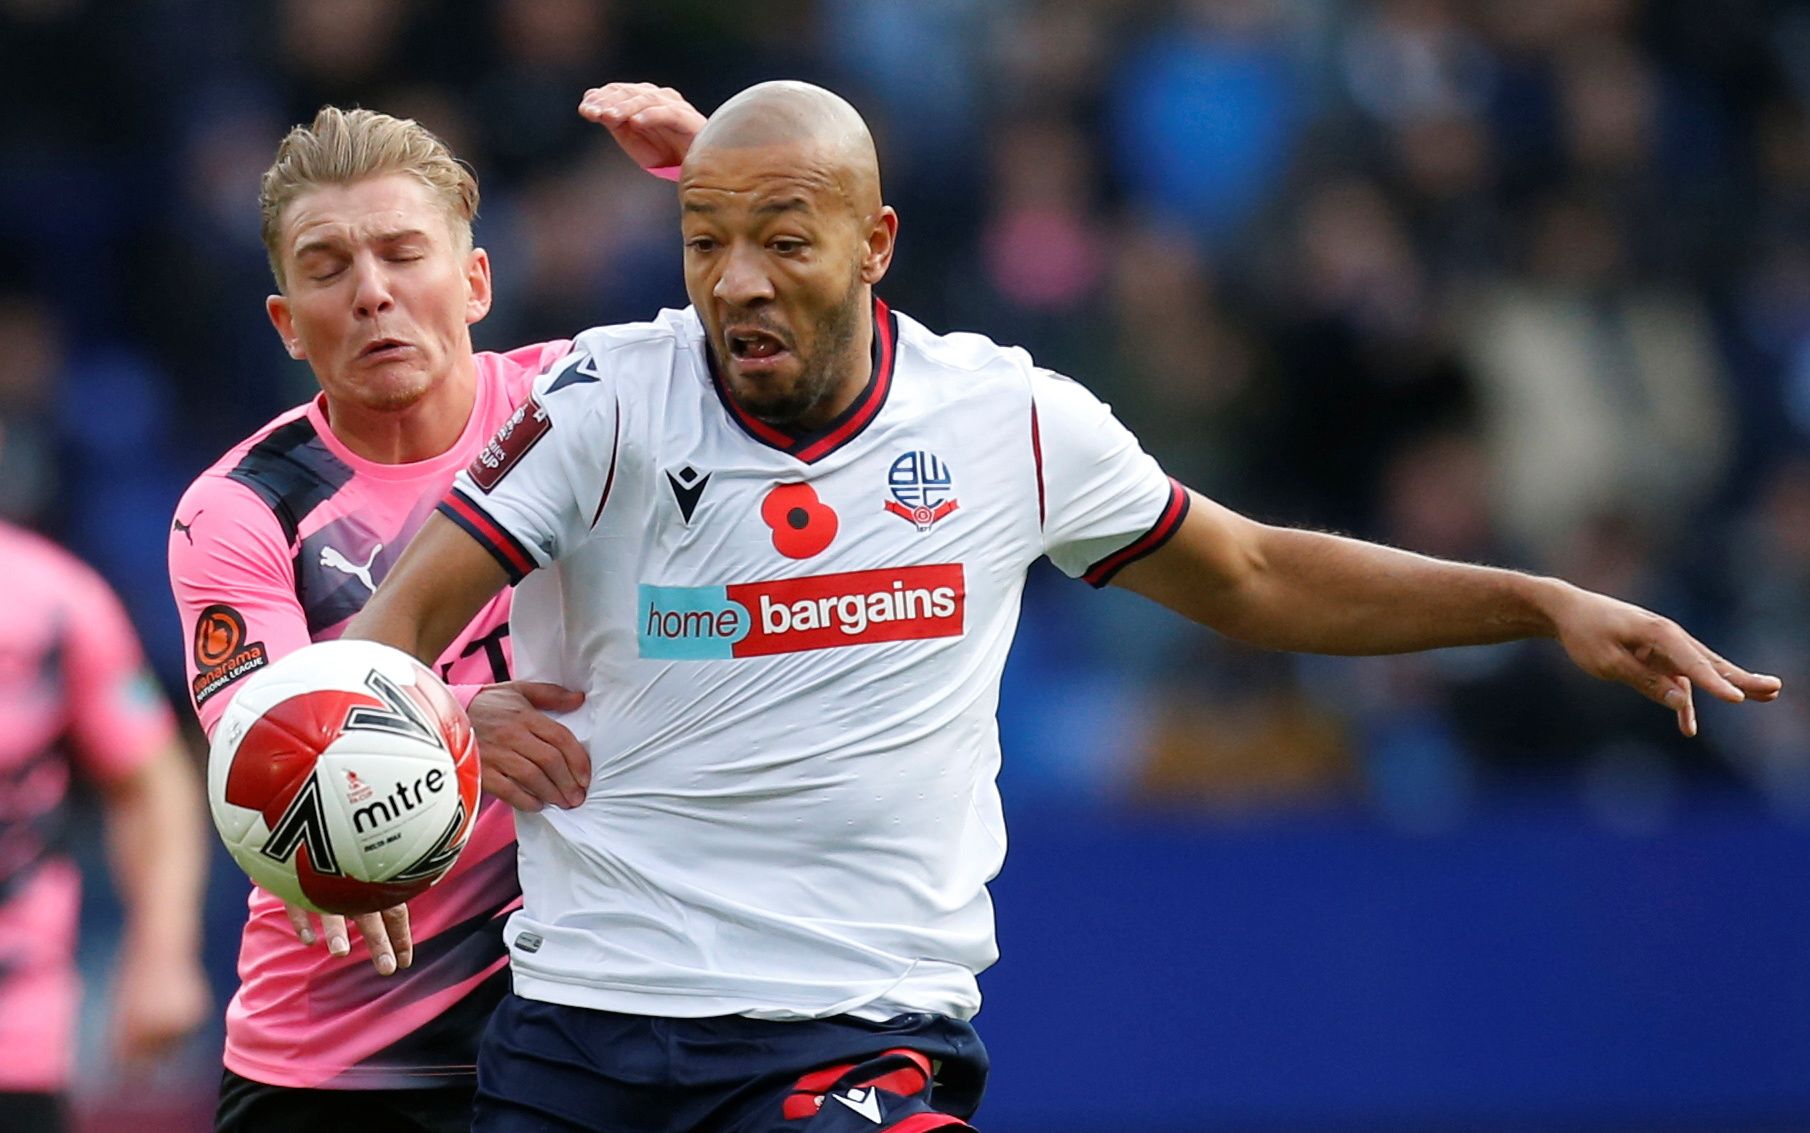 Soccer Football - FA Cup - First Round - Bolton Wanderers v Stockport County - University of Bolton Stadium, Bolton, Britain - November 7, 2021 Bolton Wanderers' Alex Baptiste in action with Stockport County's Ben Whitfield